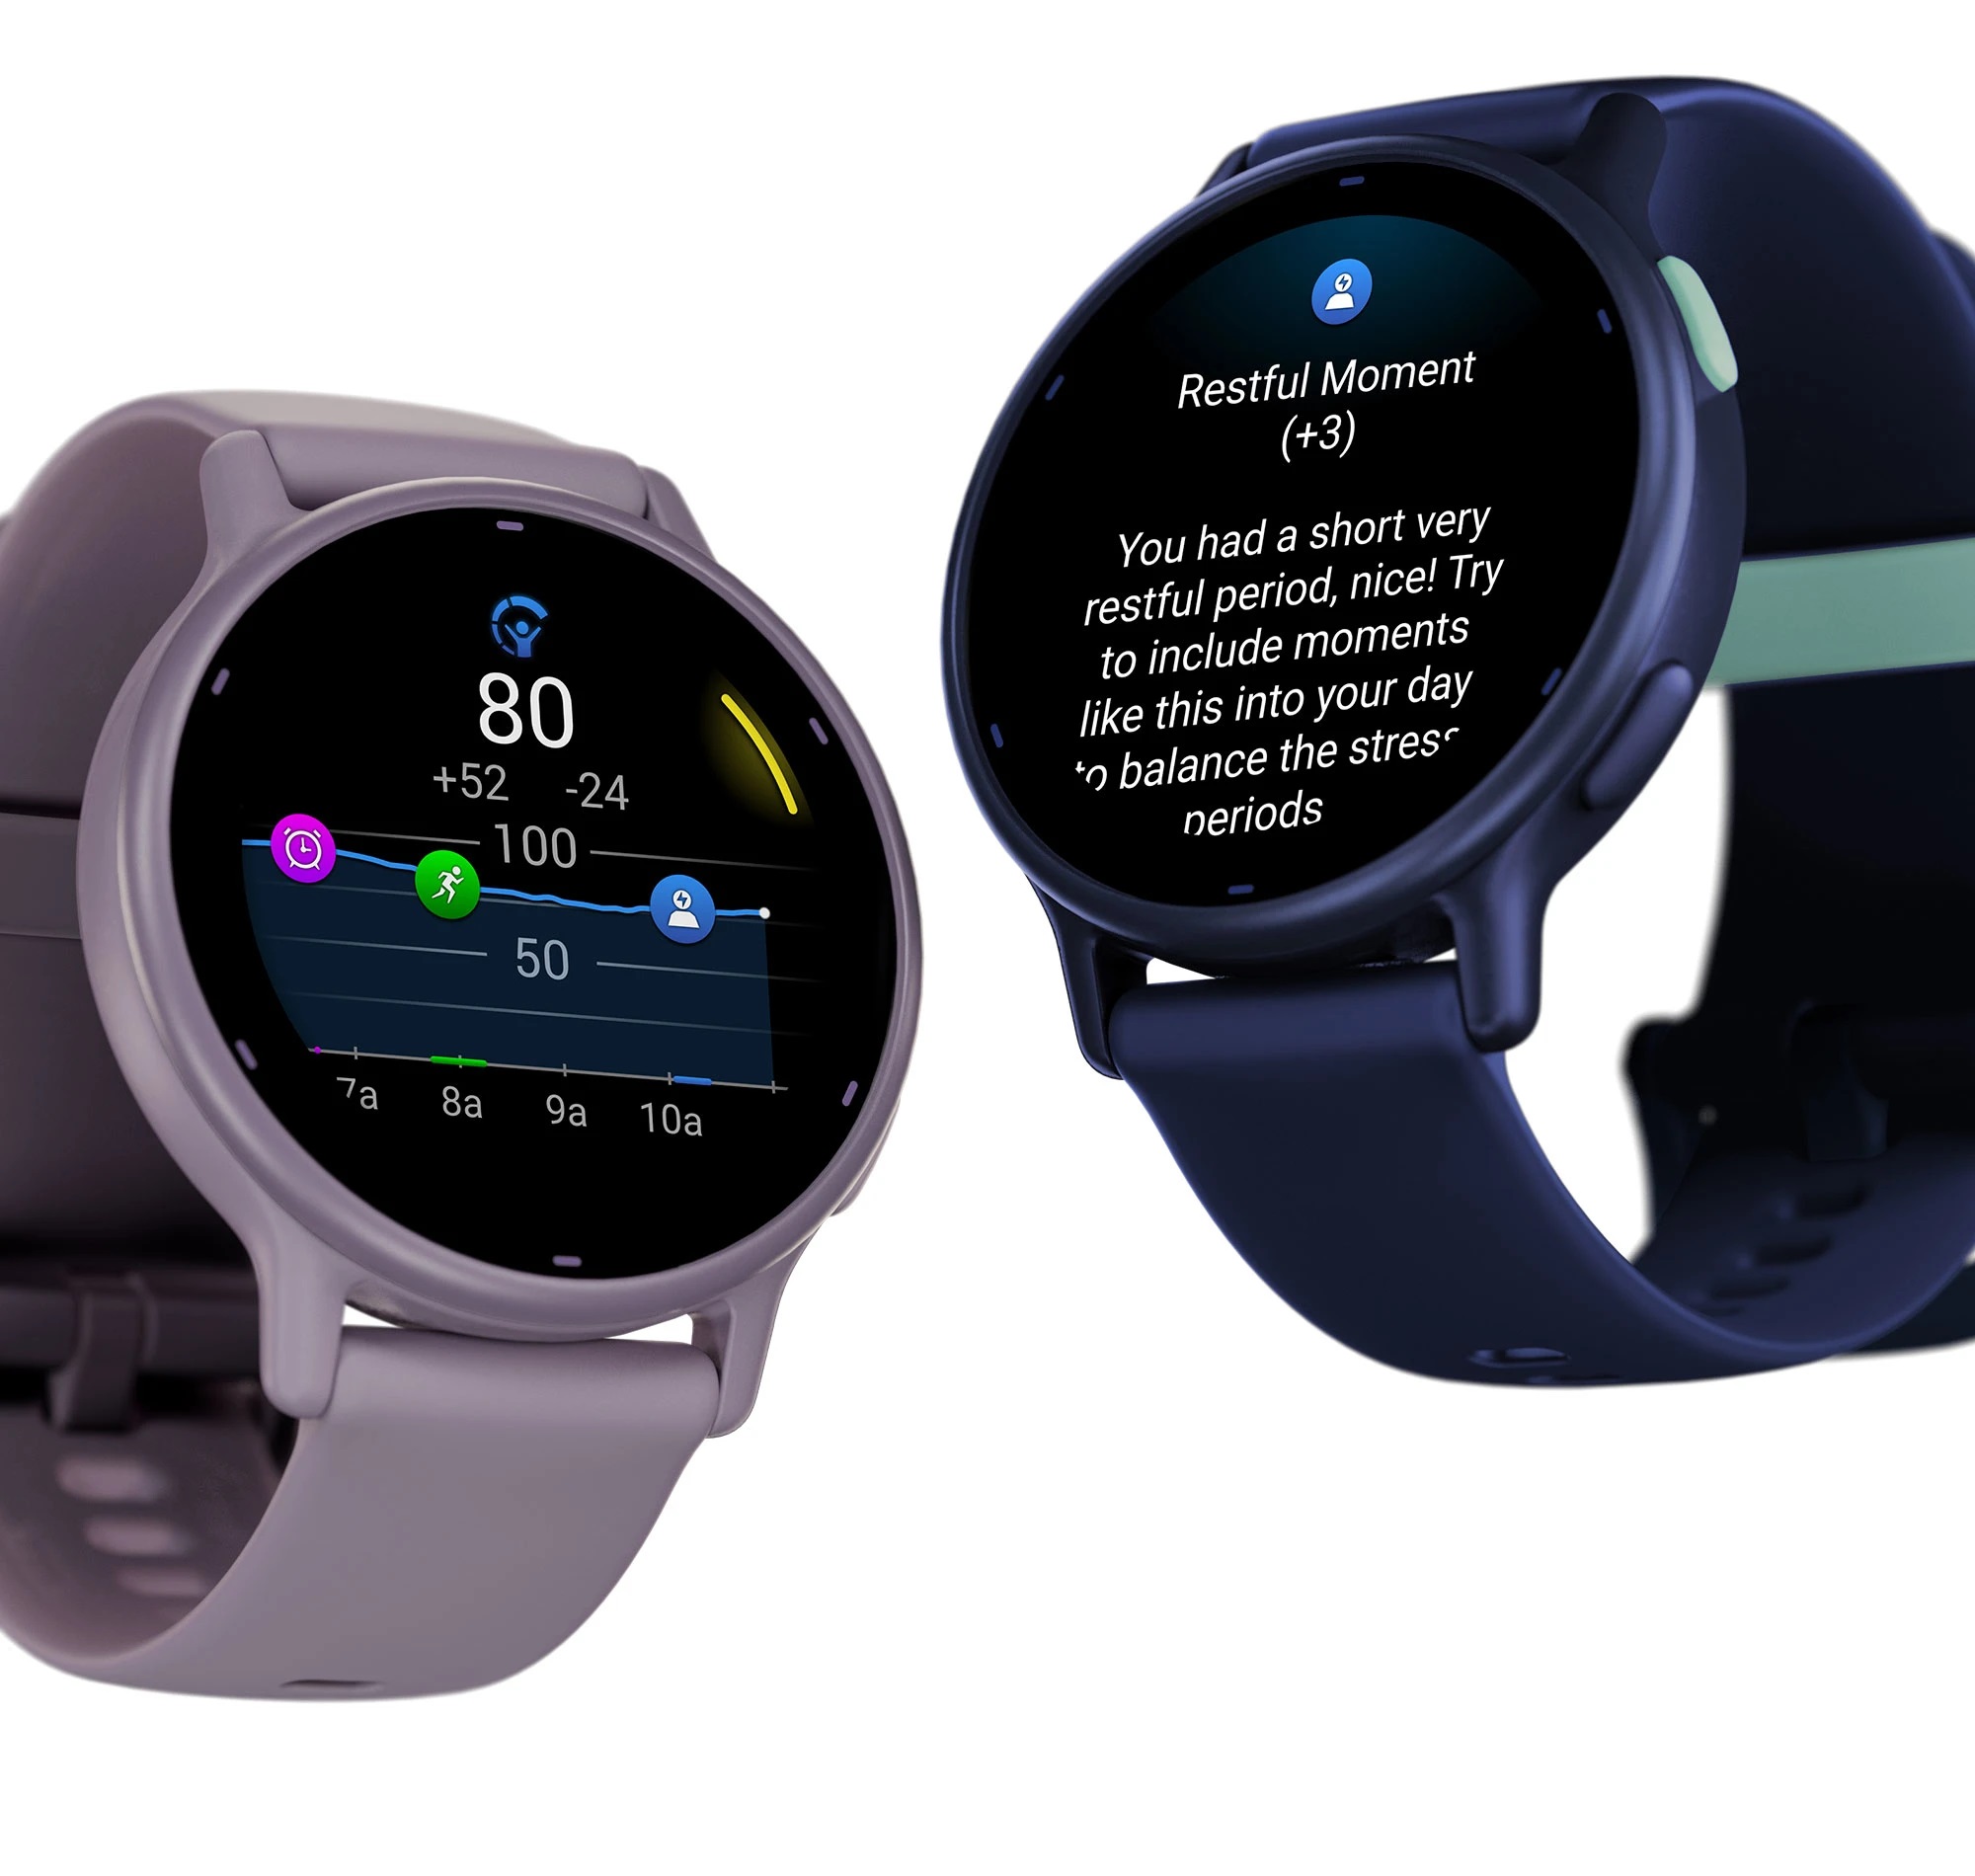 Garmin Vivoactive 5: a smartwatch with 11 days of battery life and